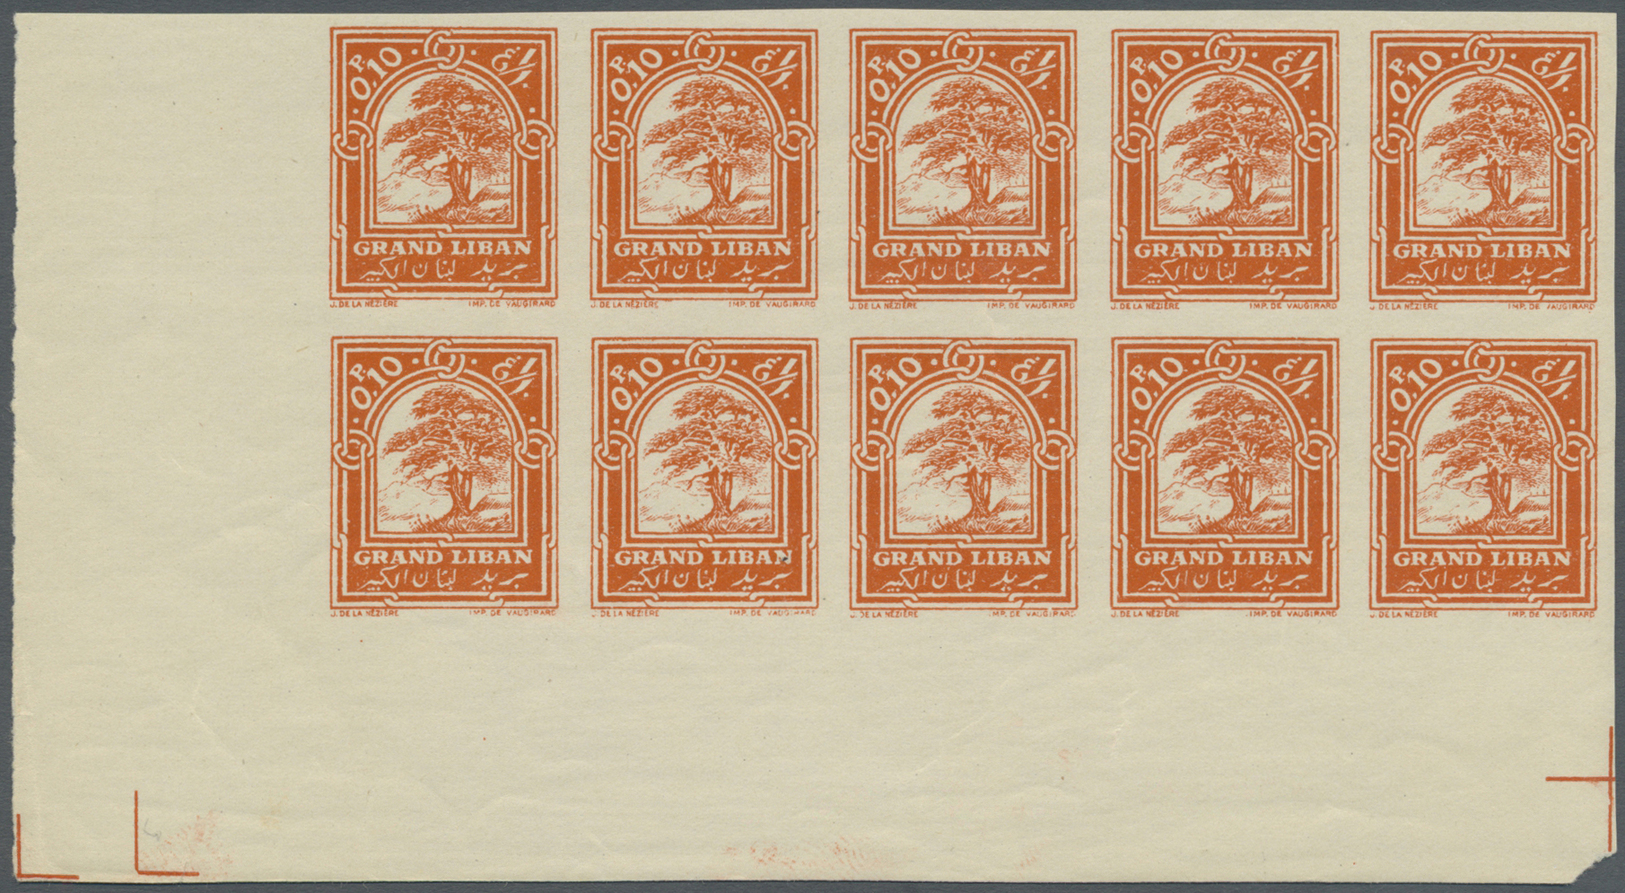 ** Libanon: 1925, 0.10pi. Cedar Tree, Imperforate Proof In Orange, Issued Design, Marginal Block Of Ten From The Lower L - Lebanon